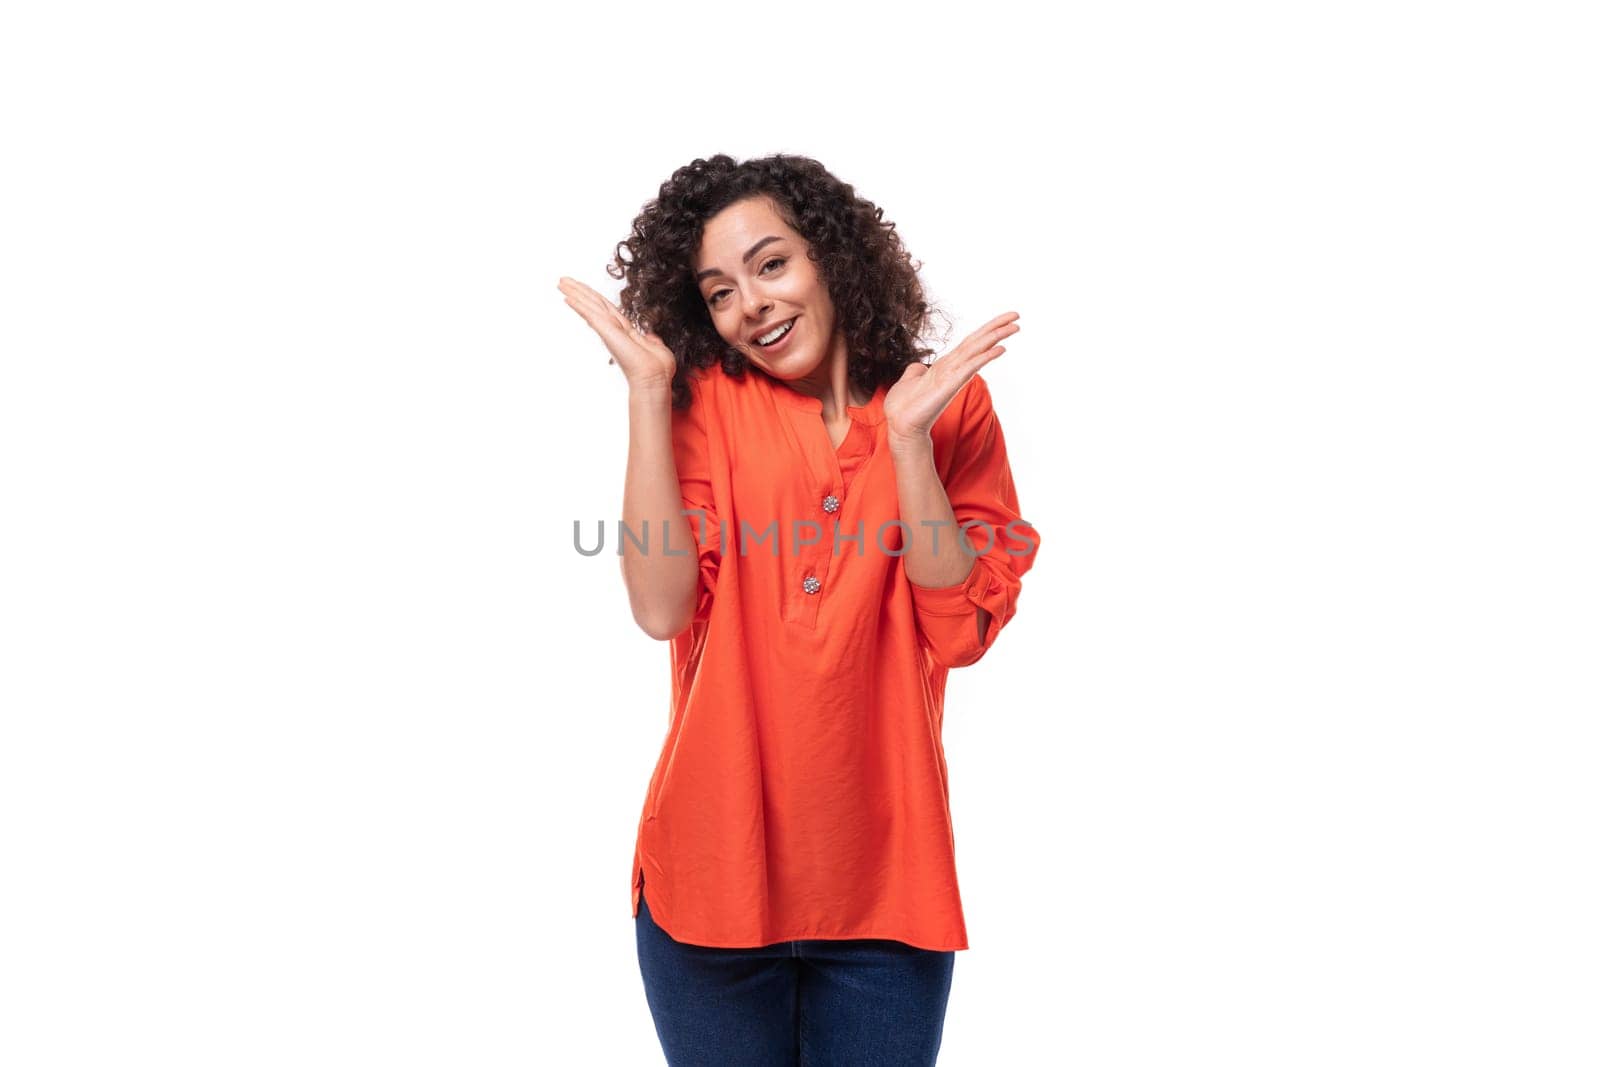 young dreamy caucasian business woman with wavy hair dressed in an orange blouse on a white background.